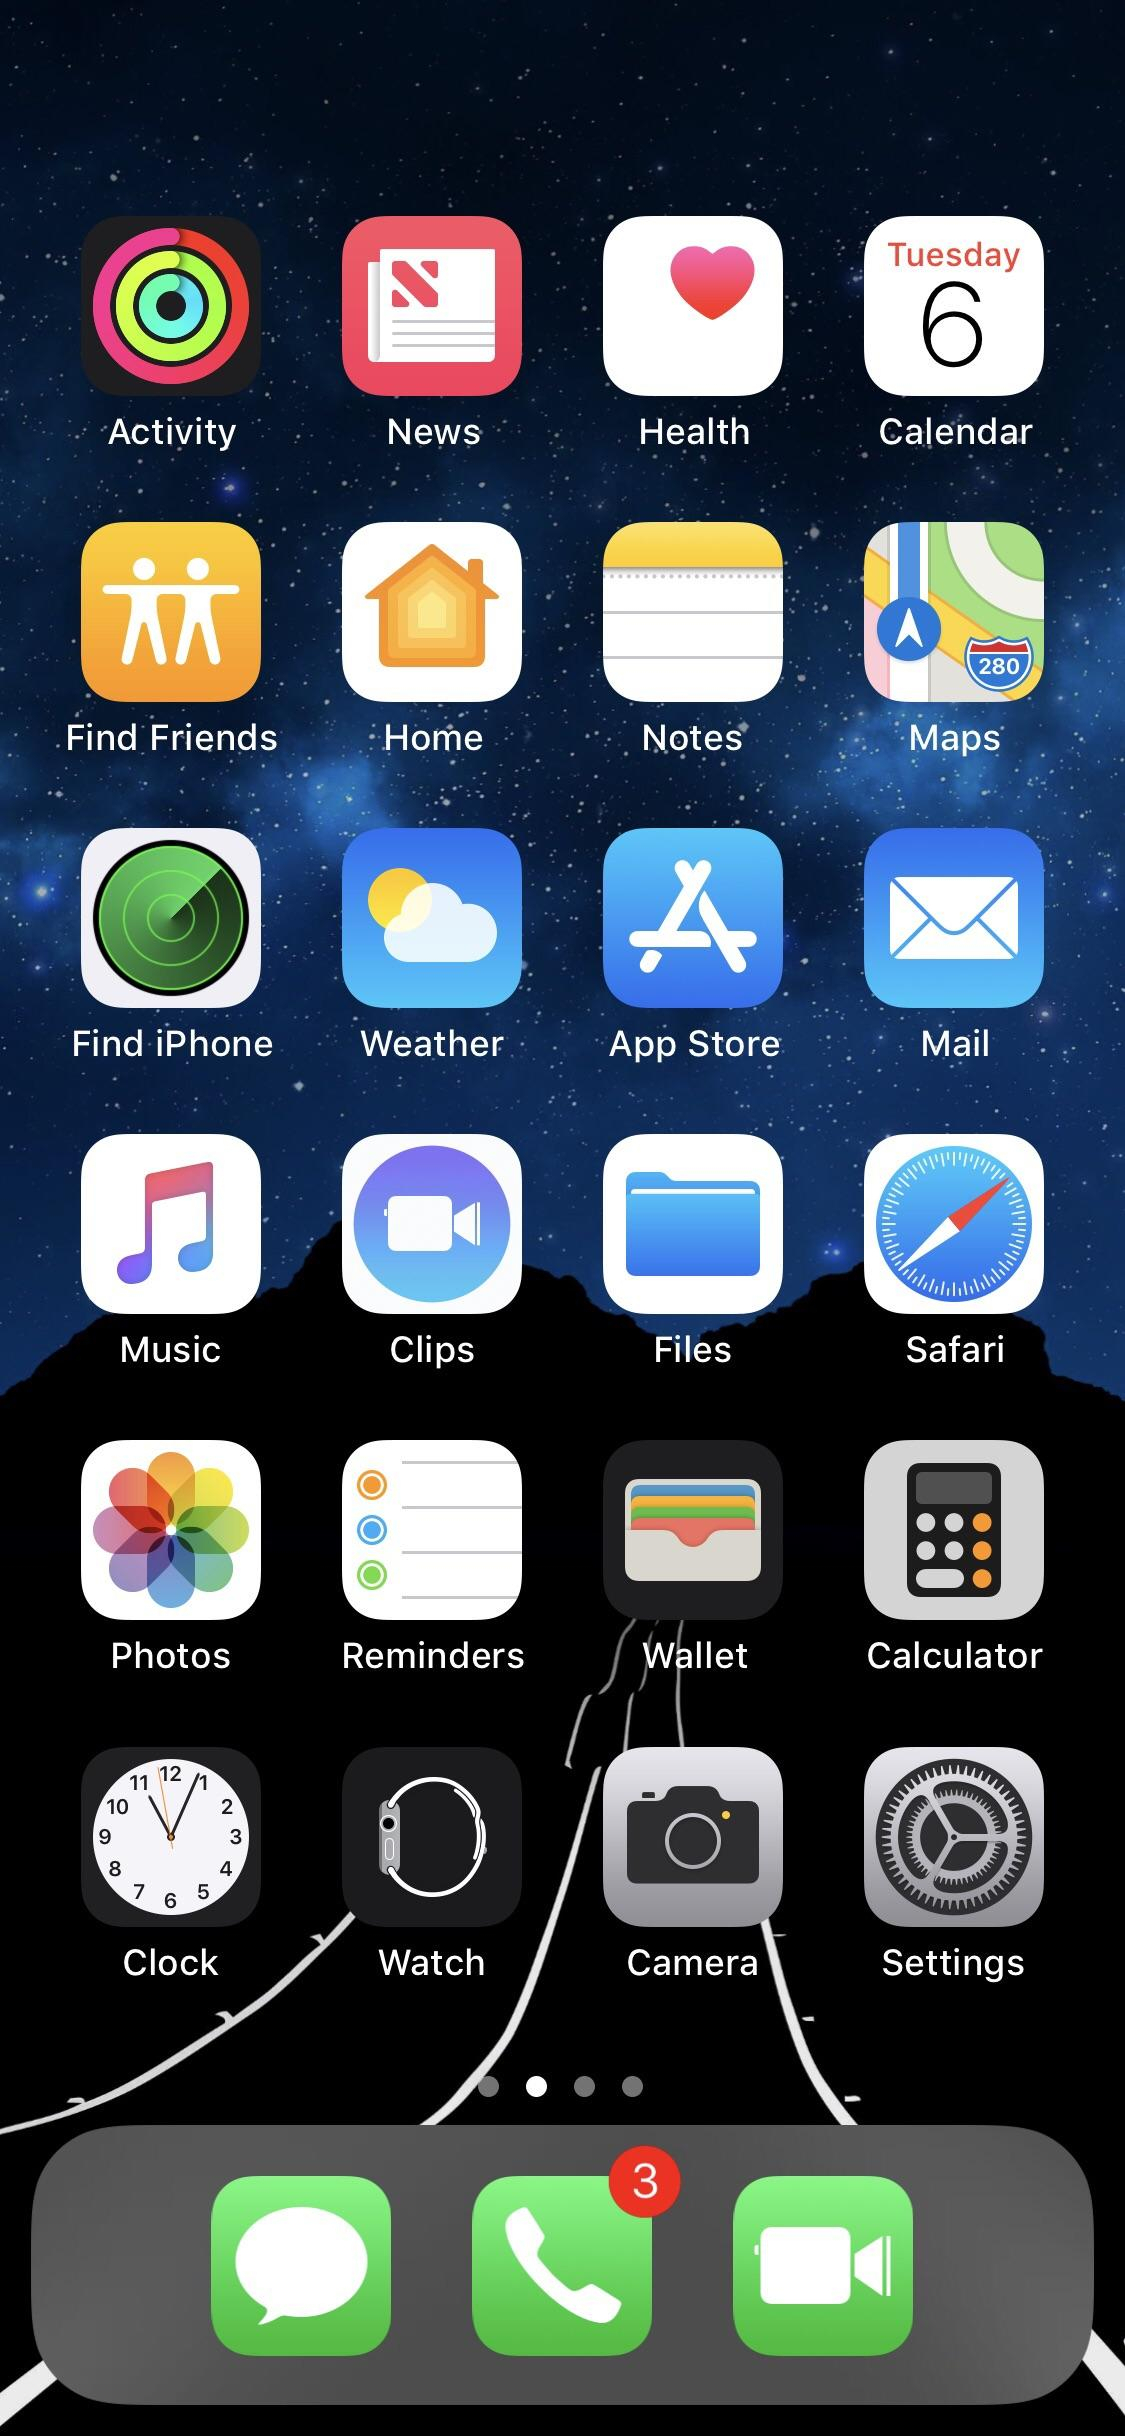 Top Status Bar Disappeared On Iphone X  Has Anyone Else Had with regard to Calendar Icon Missing On Iphone